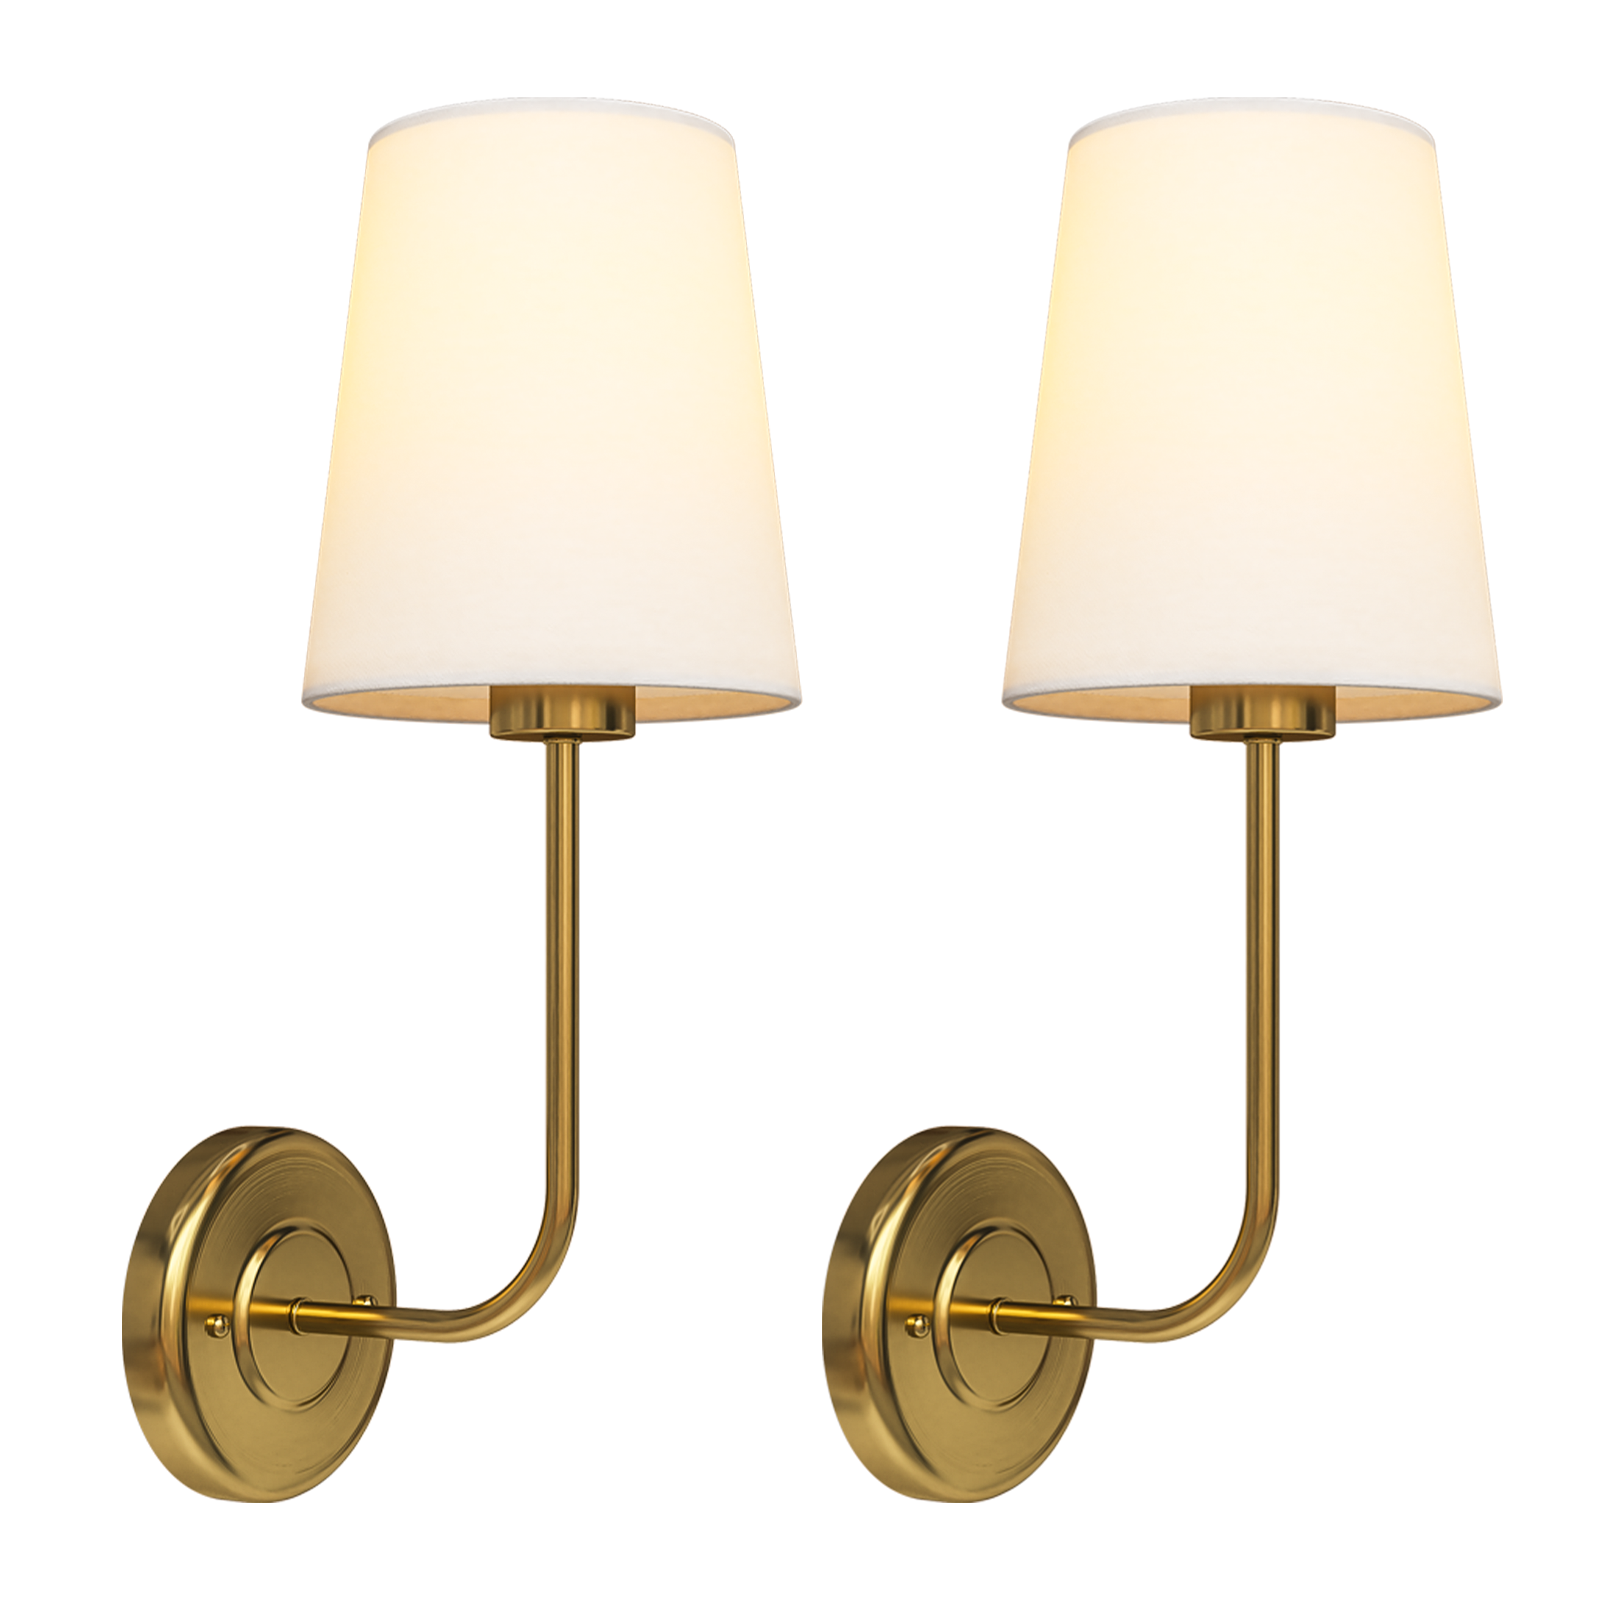 LUMIMAN Wall Sconces Set of Two, Brass Vintage Industrial Wall Sconce